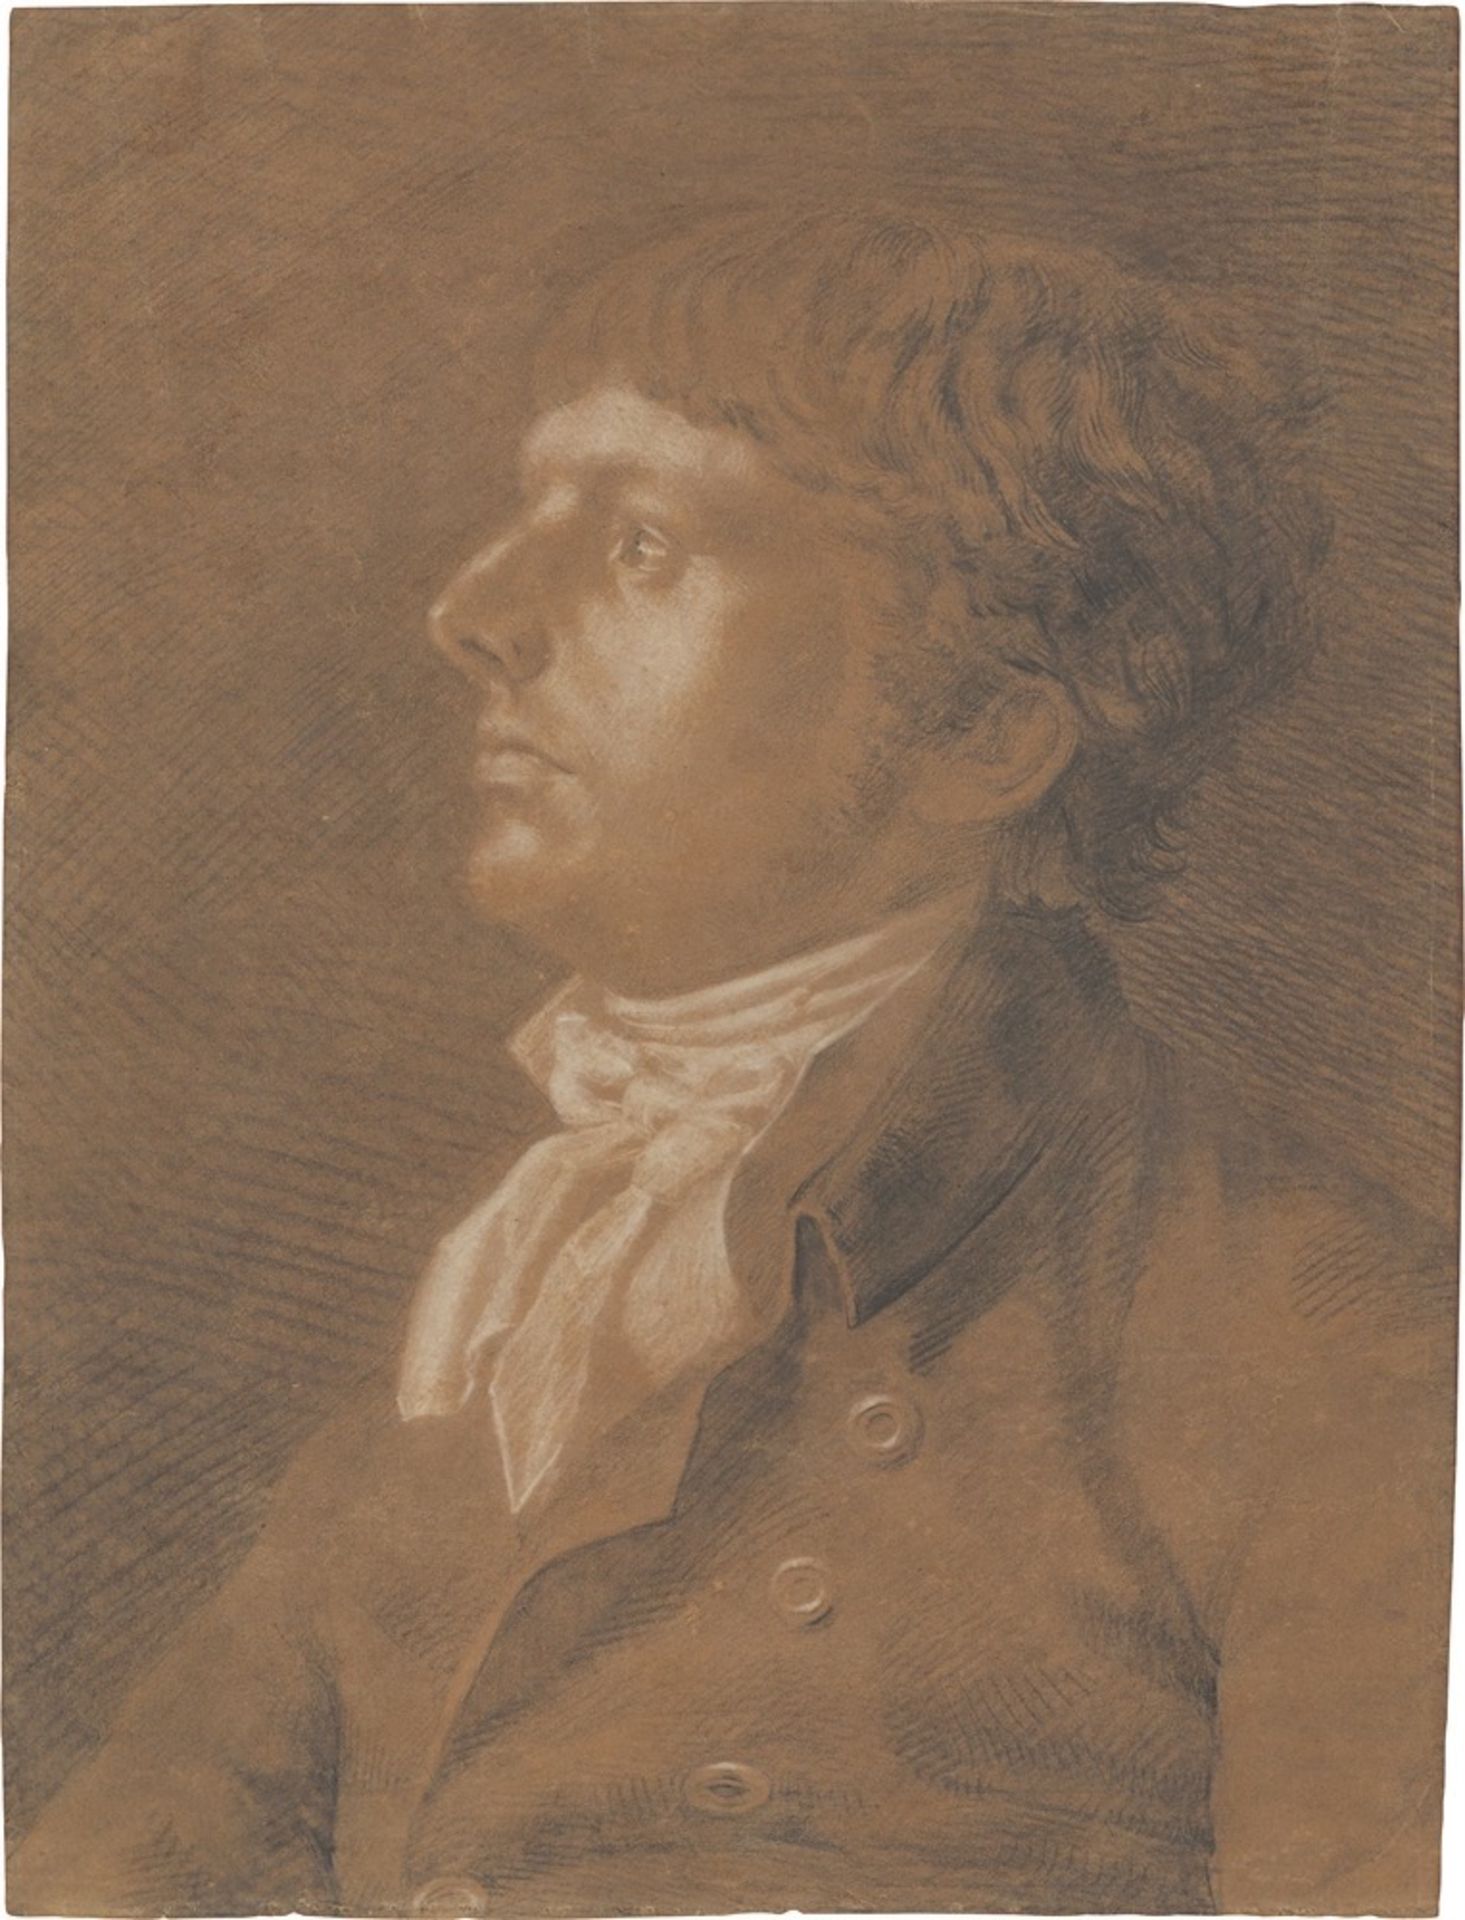 Philipp Otto Runge. Portrait of his brother Jakob Runge. April/May 1801